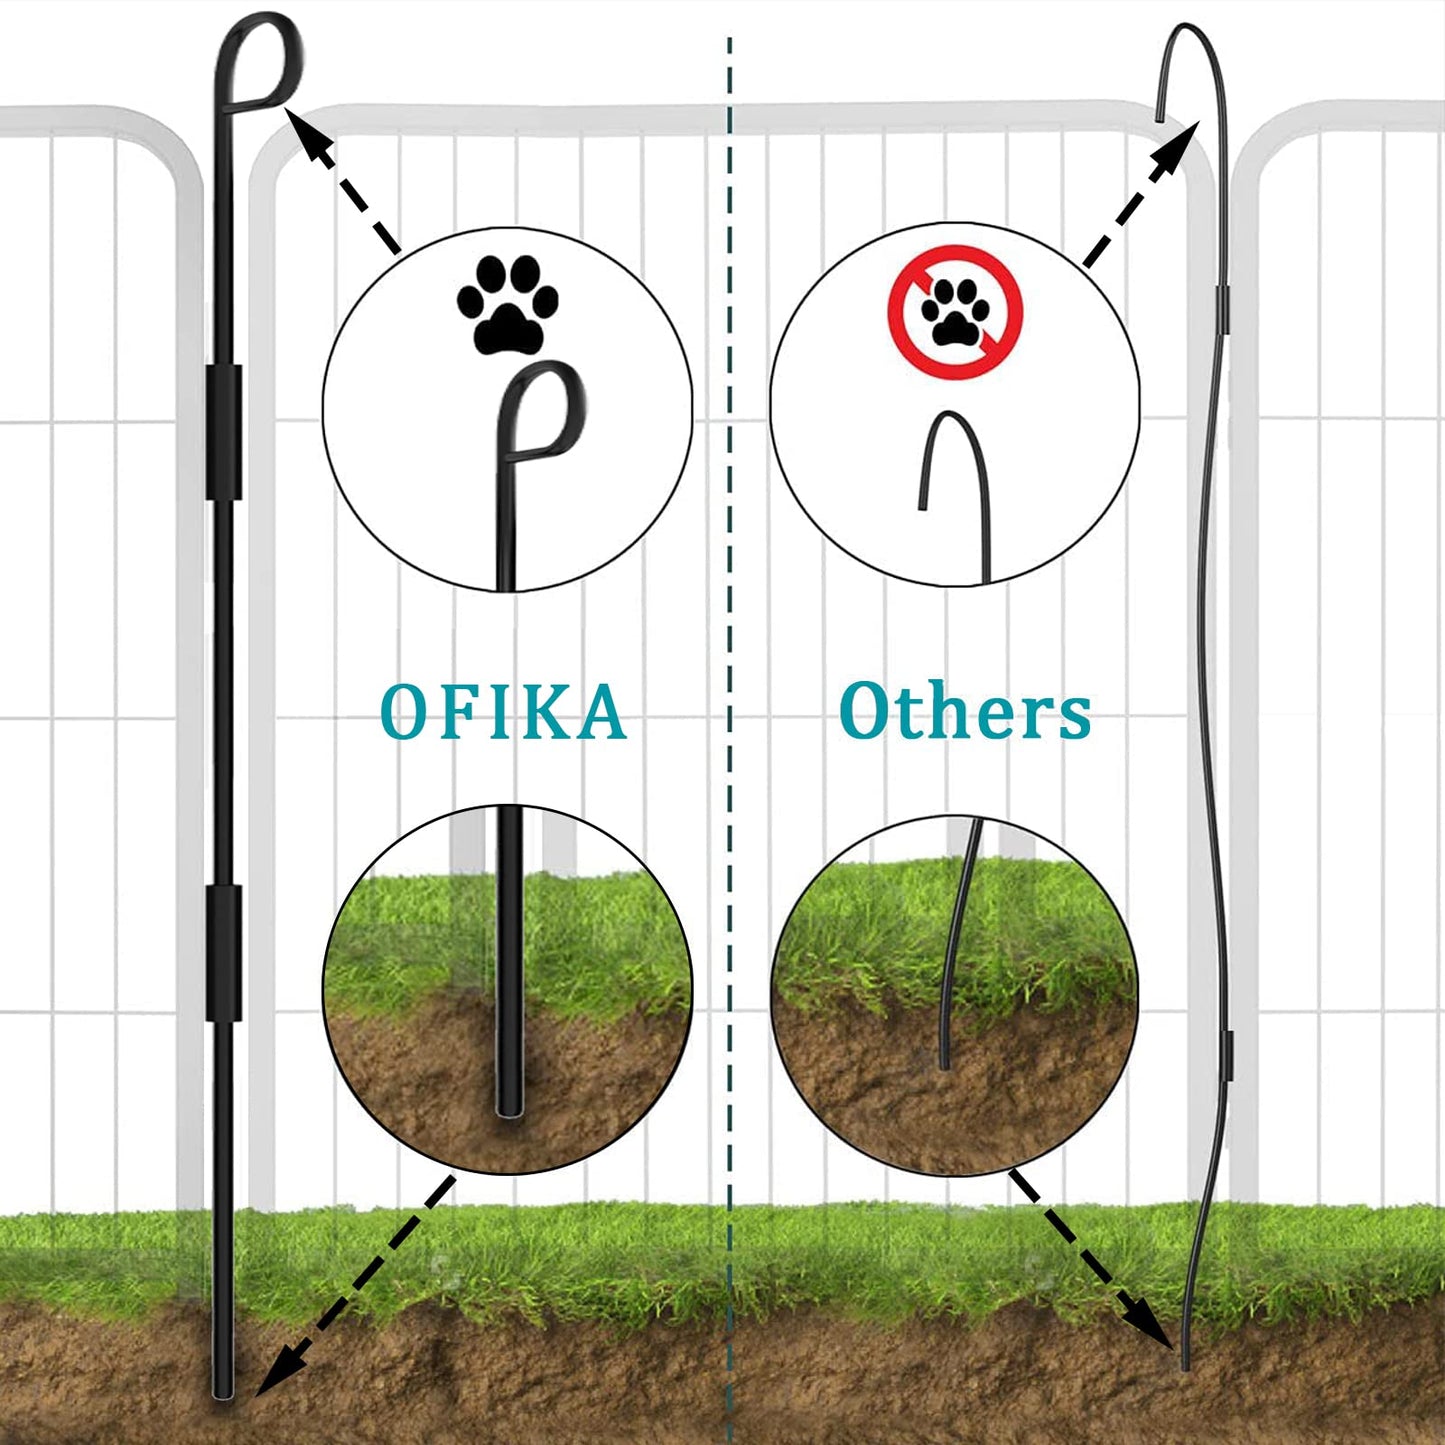 OFIKA Heavy Duty Metal Playpen for Medium/Small Animals, 8 Panels 24”Height x 32" Width, Dog Fence Exercise Pen with Doors, Pet Puppy Pen for Outdoor, Indoor, RV, Camping, Yard